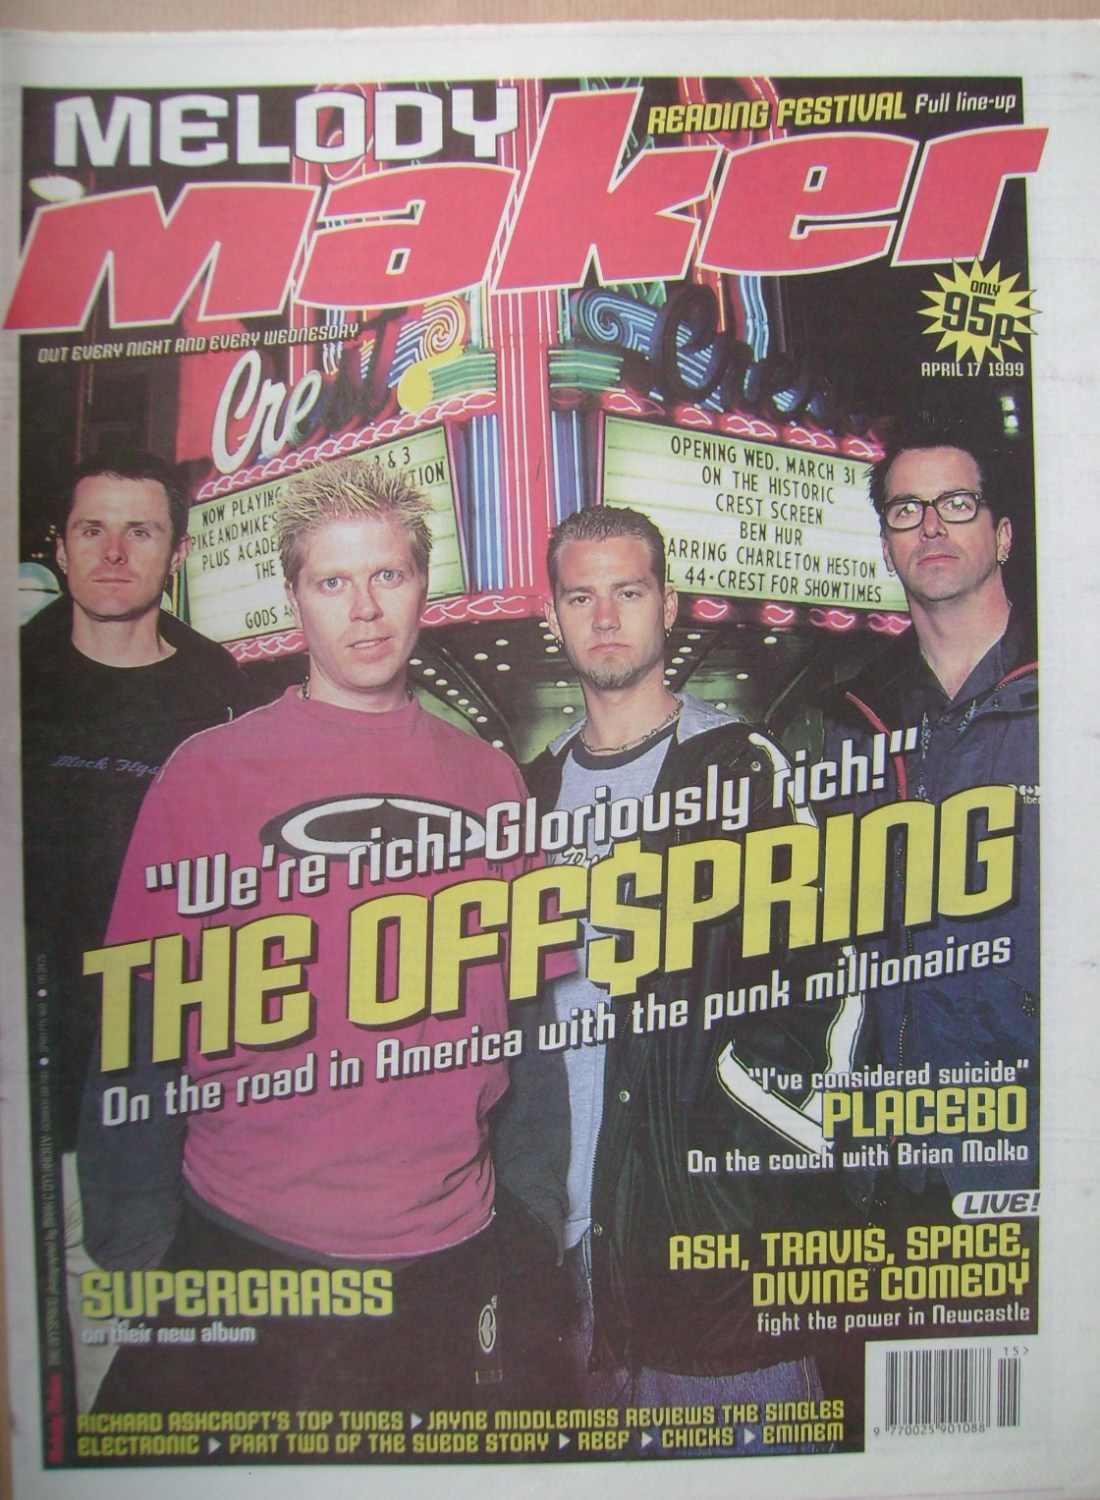 <!--1999-04-17-->Melody Maker magazine - The Offspring cover (17 April 1999